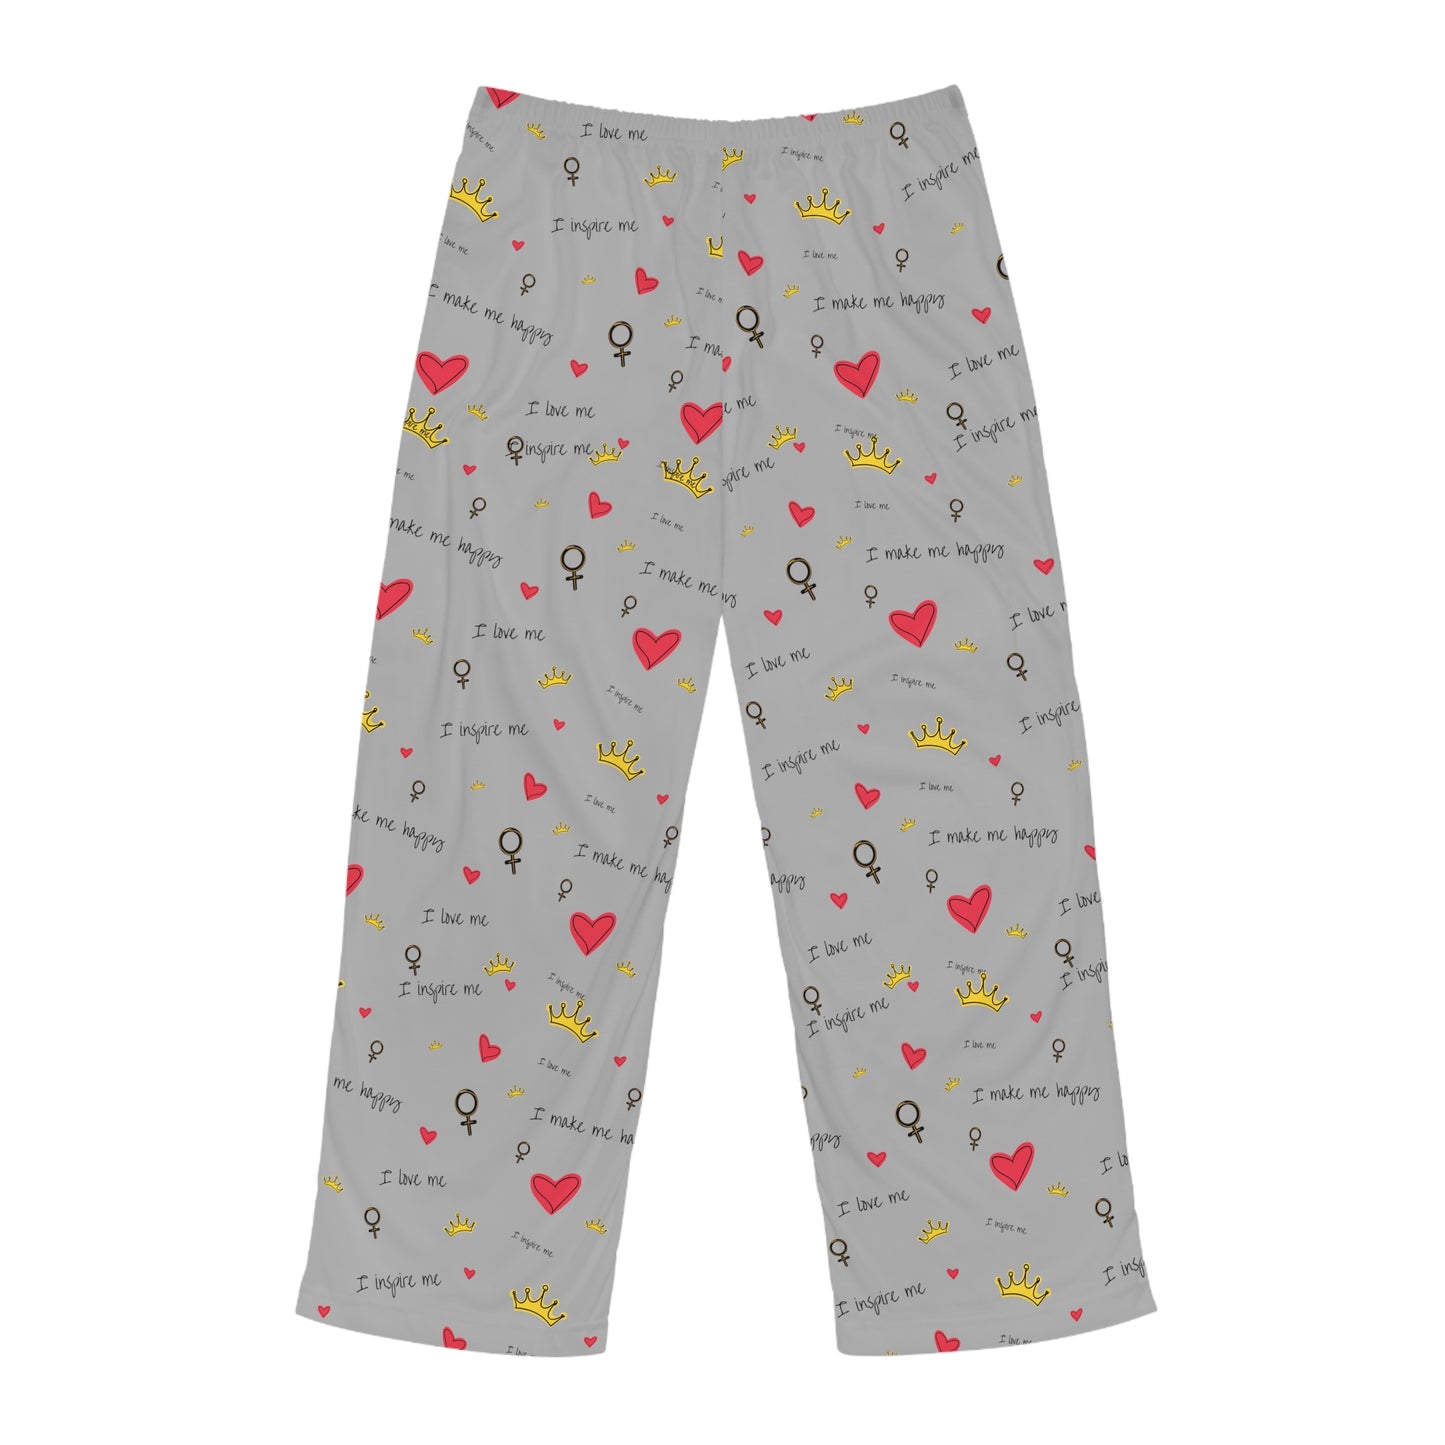 A Printify men's grey pajama pants with hearts, making it the perfect Valentine's Day gift. Made from 100% polyester.